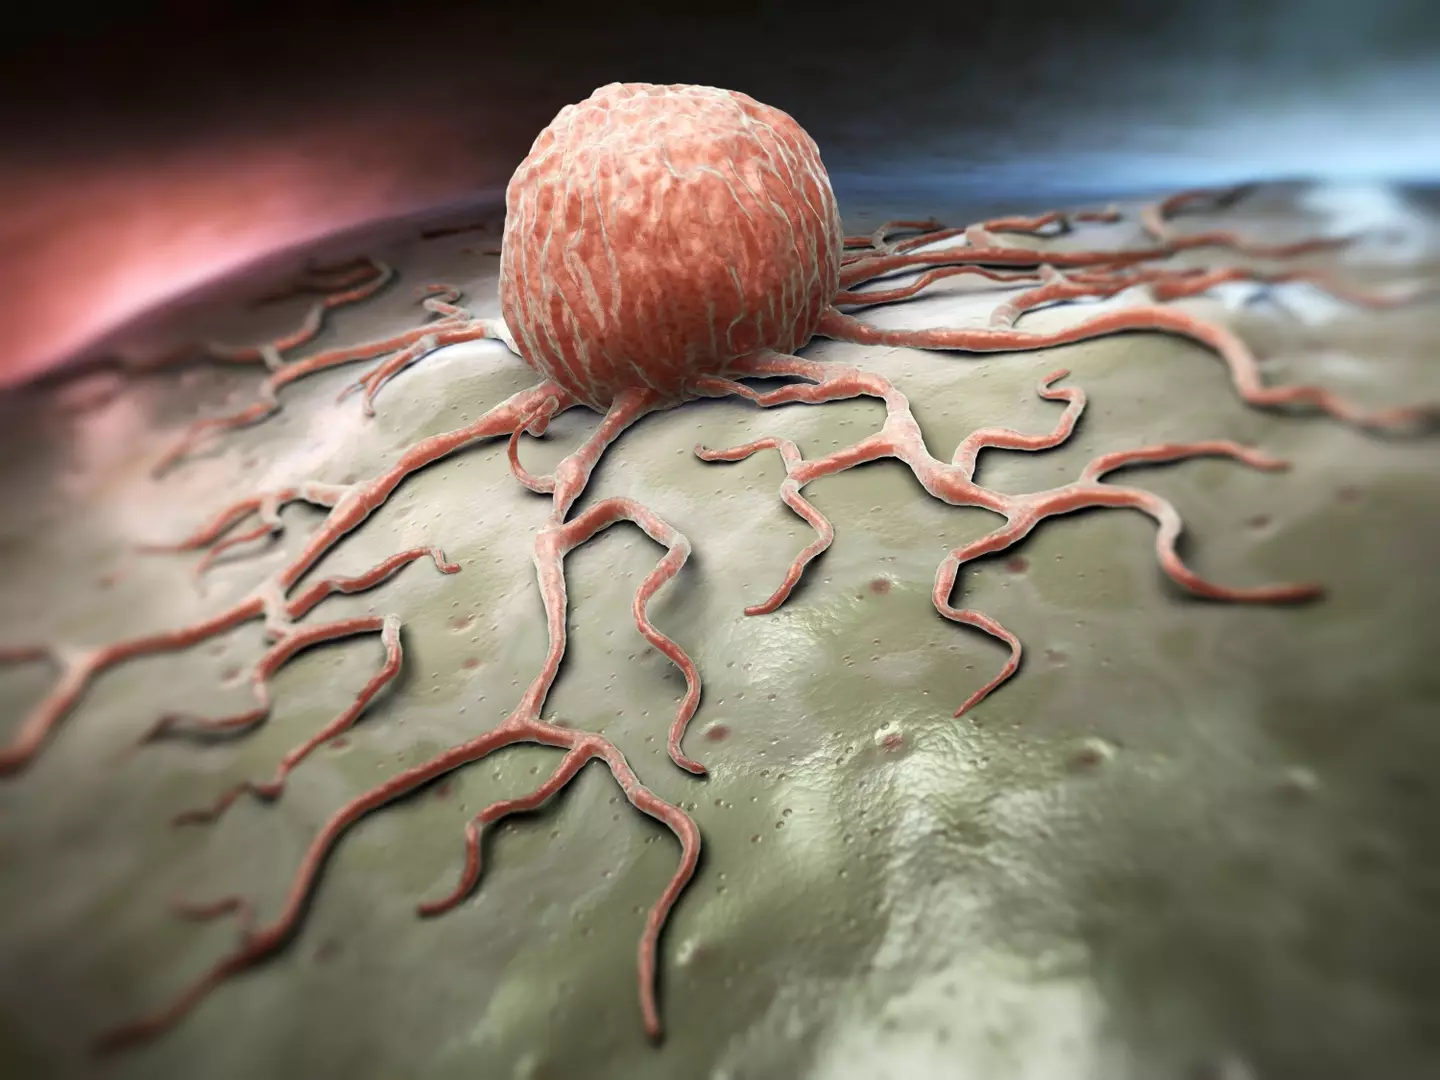 Close-up view of a cancer cell.